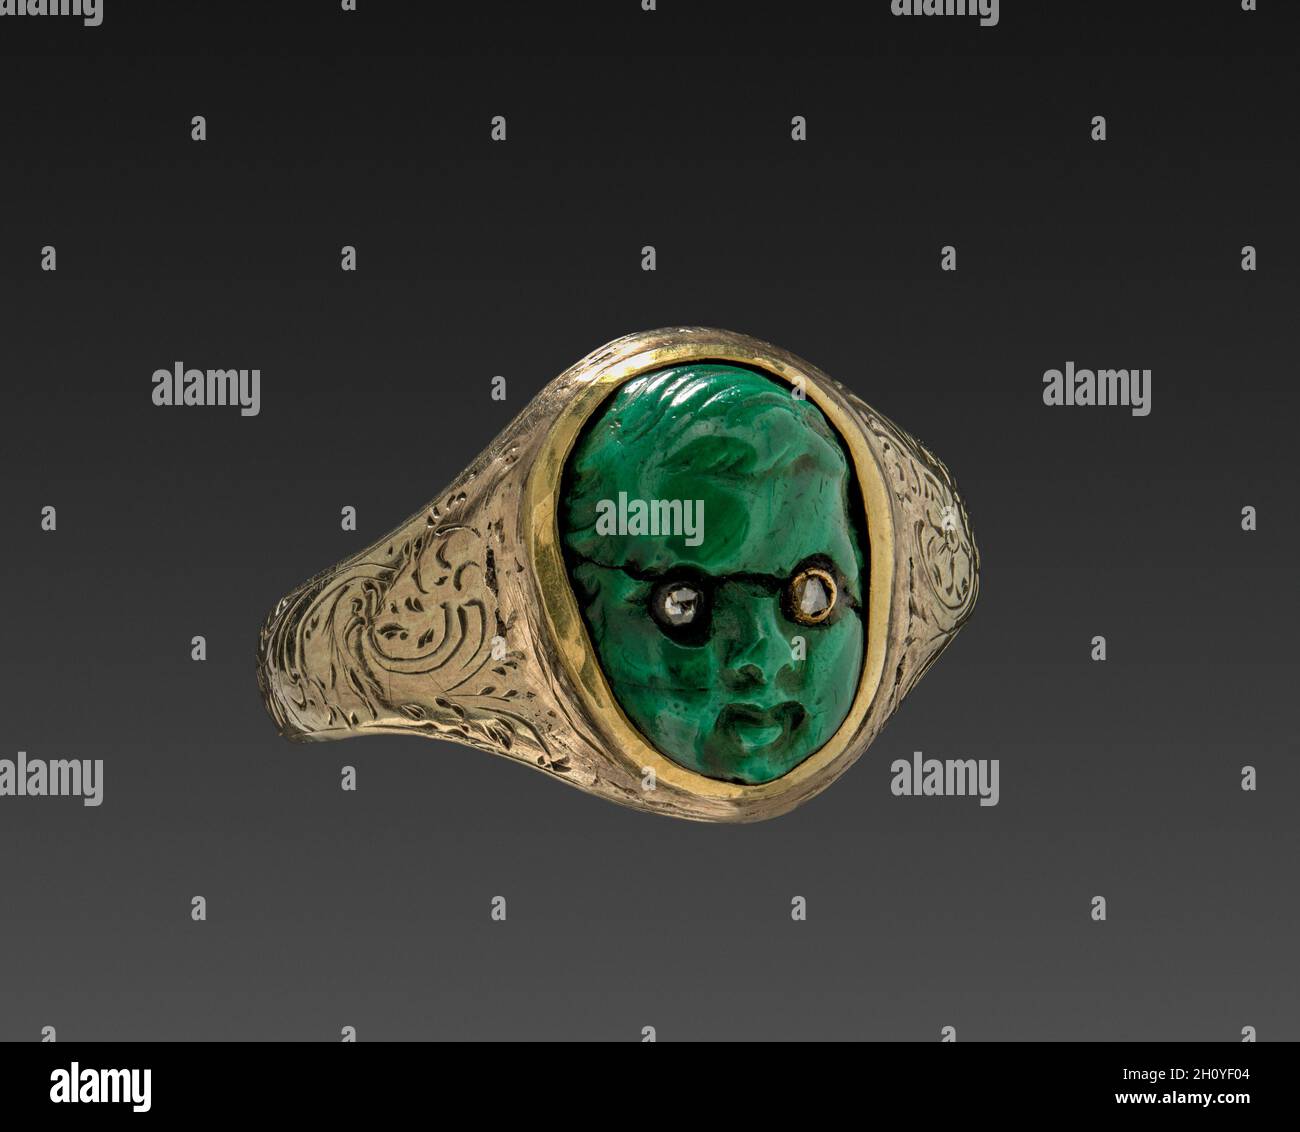 Ring, c. 1870. America ?, 19th century. Gold band with green stone head set with diamond chips; diameter: 1.8 cm (11/16 in.). Stock Photo